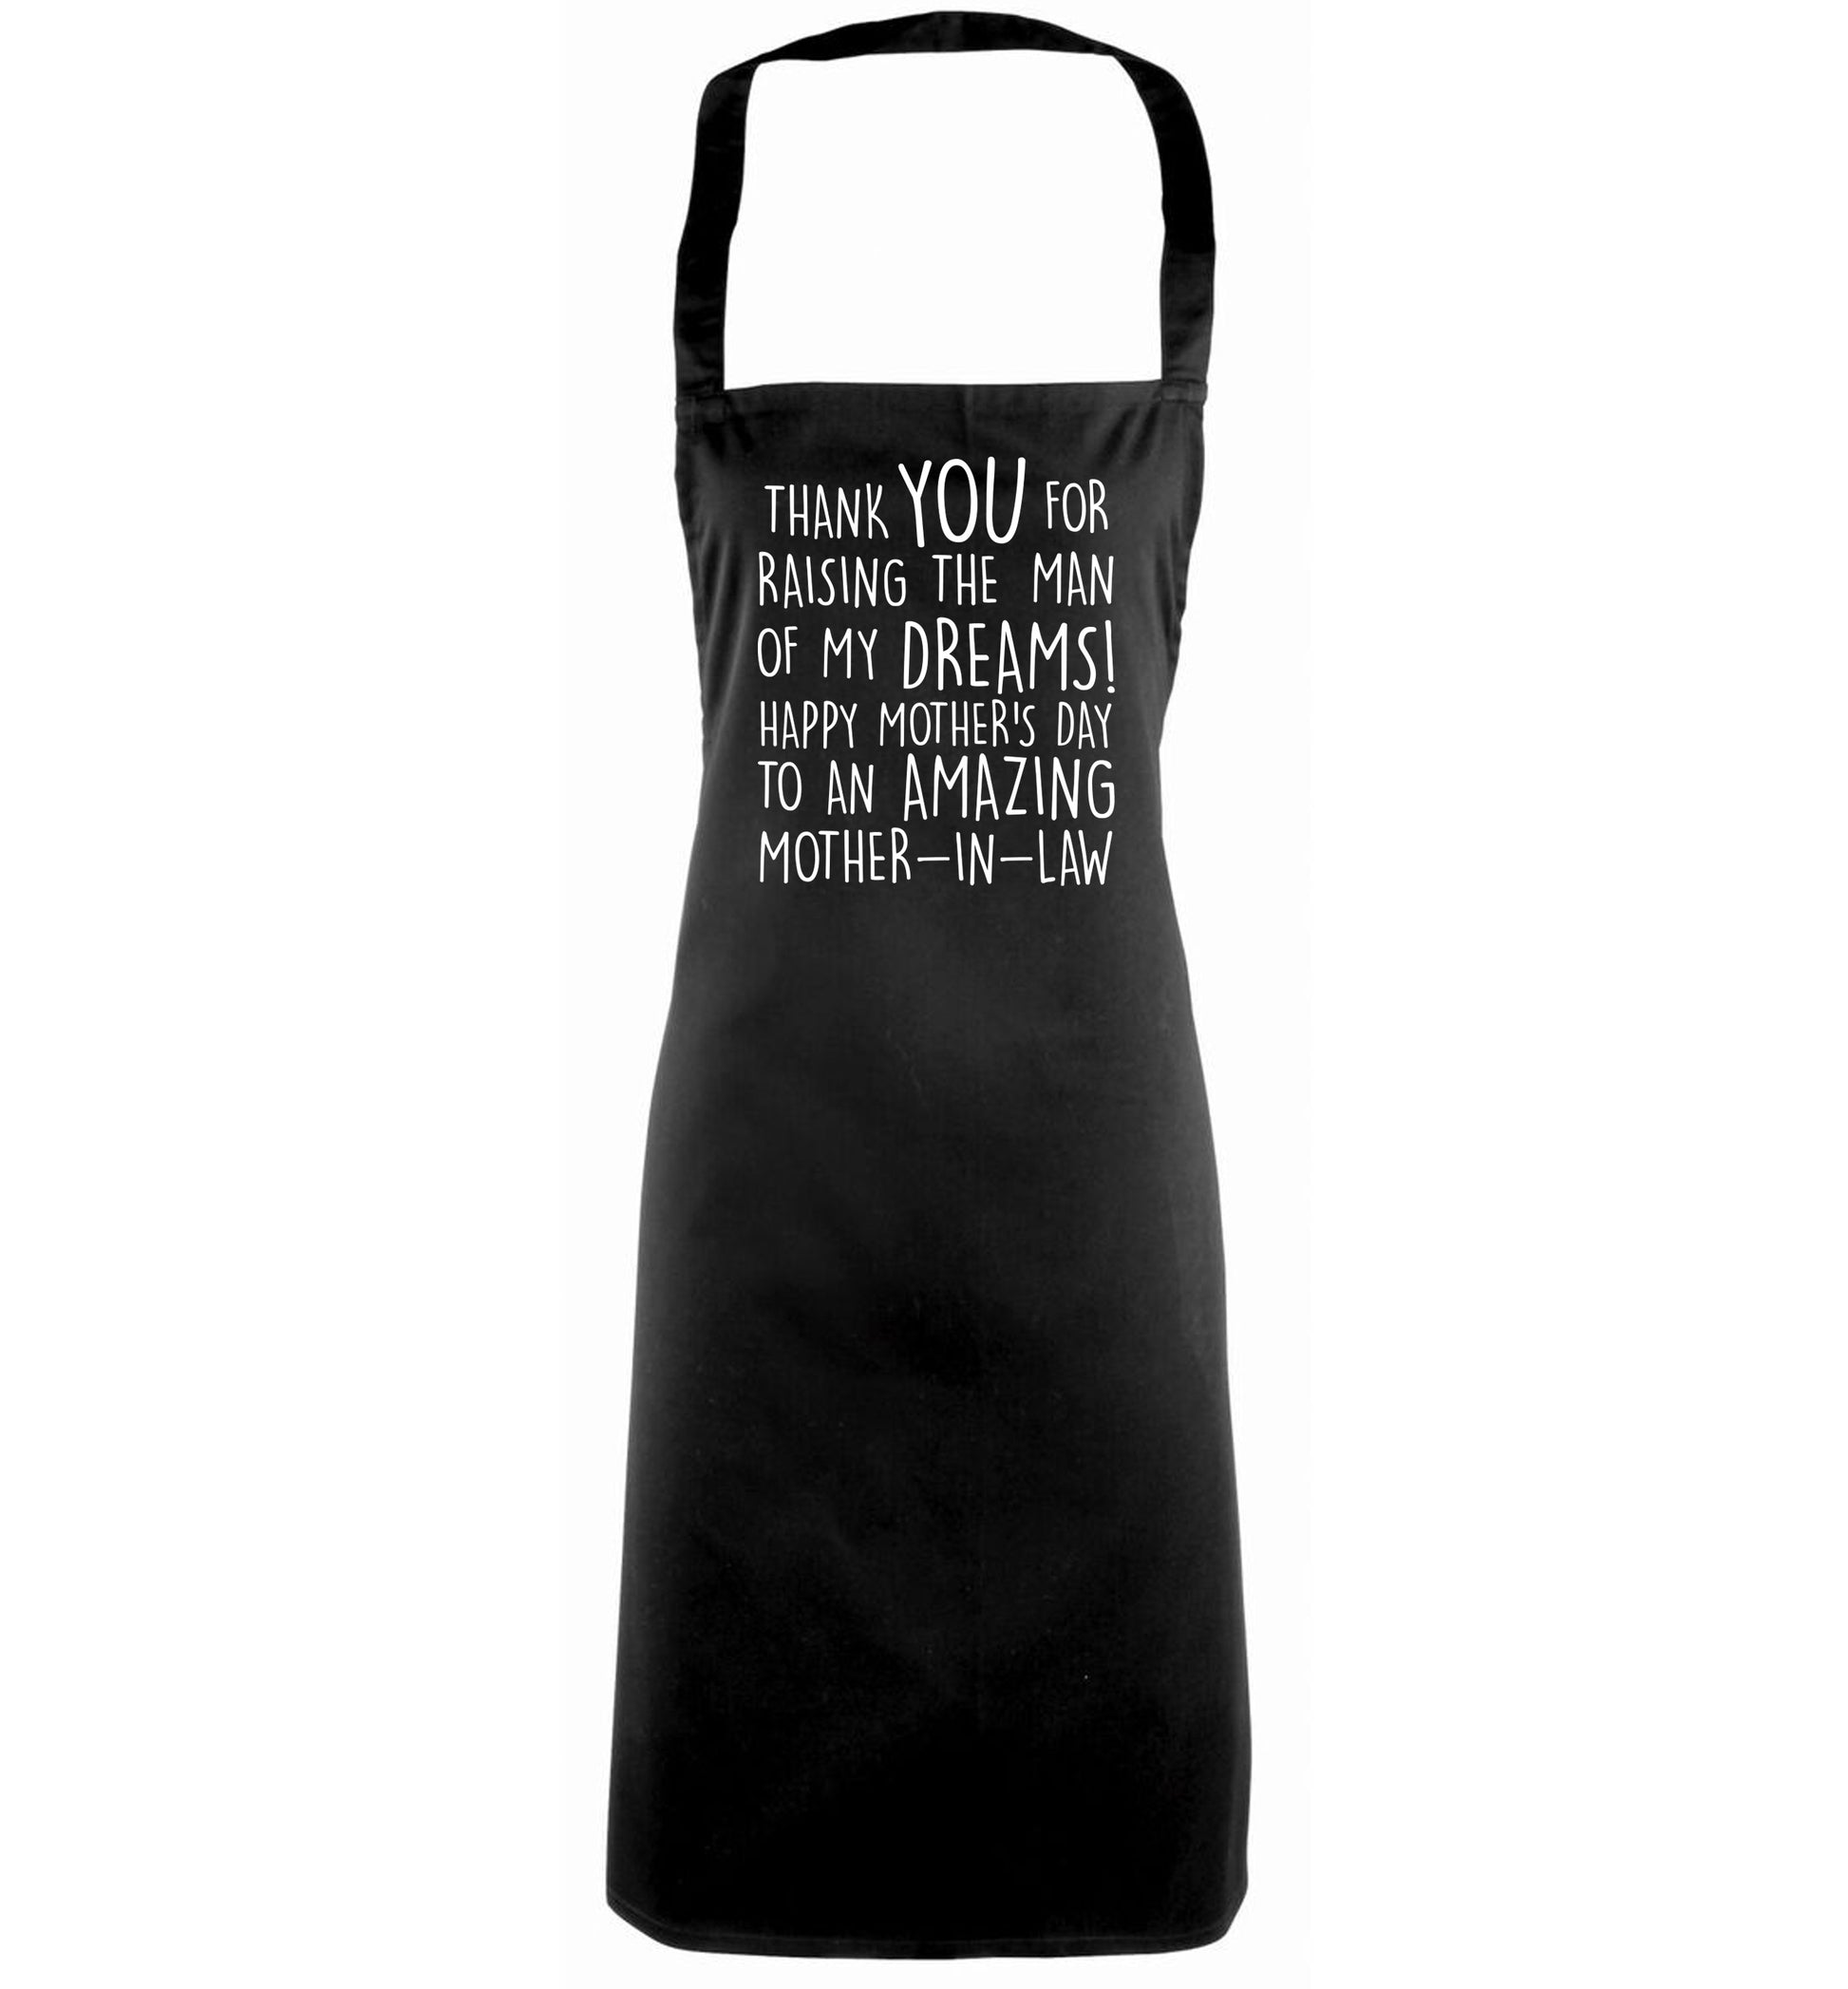 Thank you for raising the man of my dreams happy mother's day mother-in-law black apron